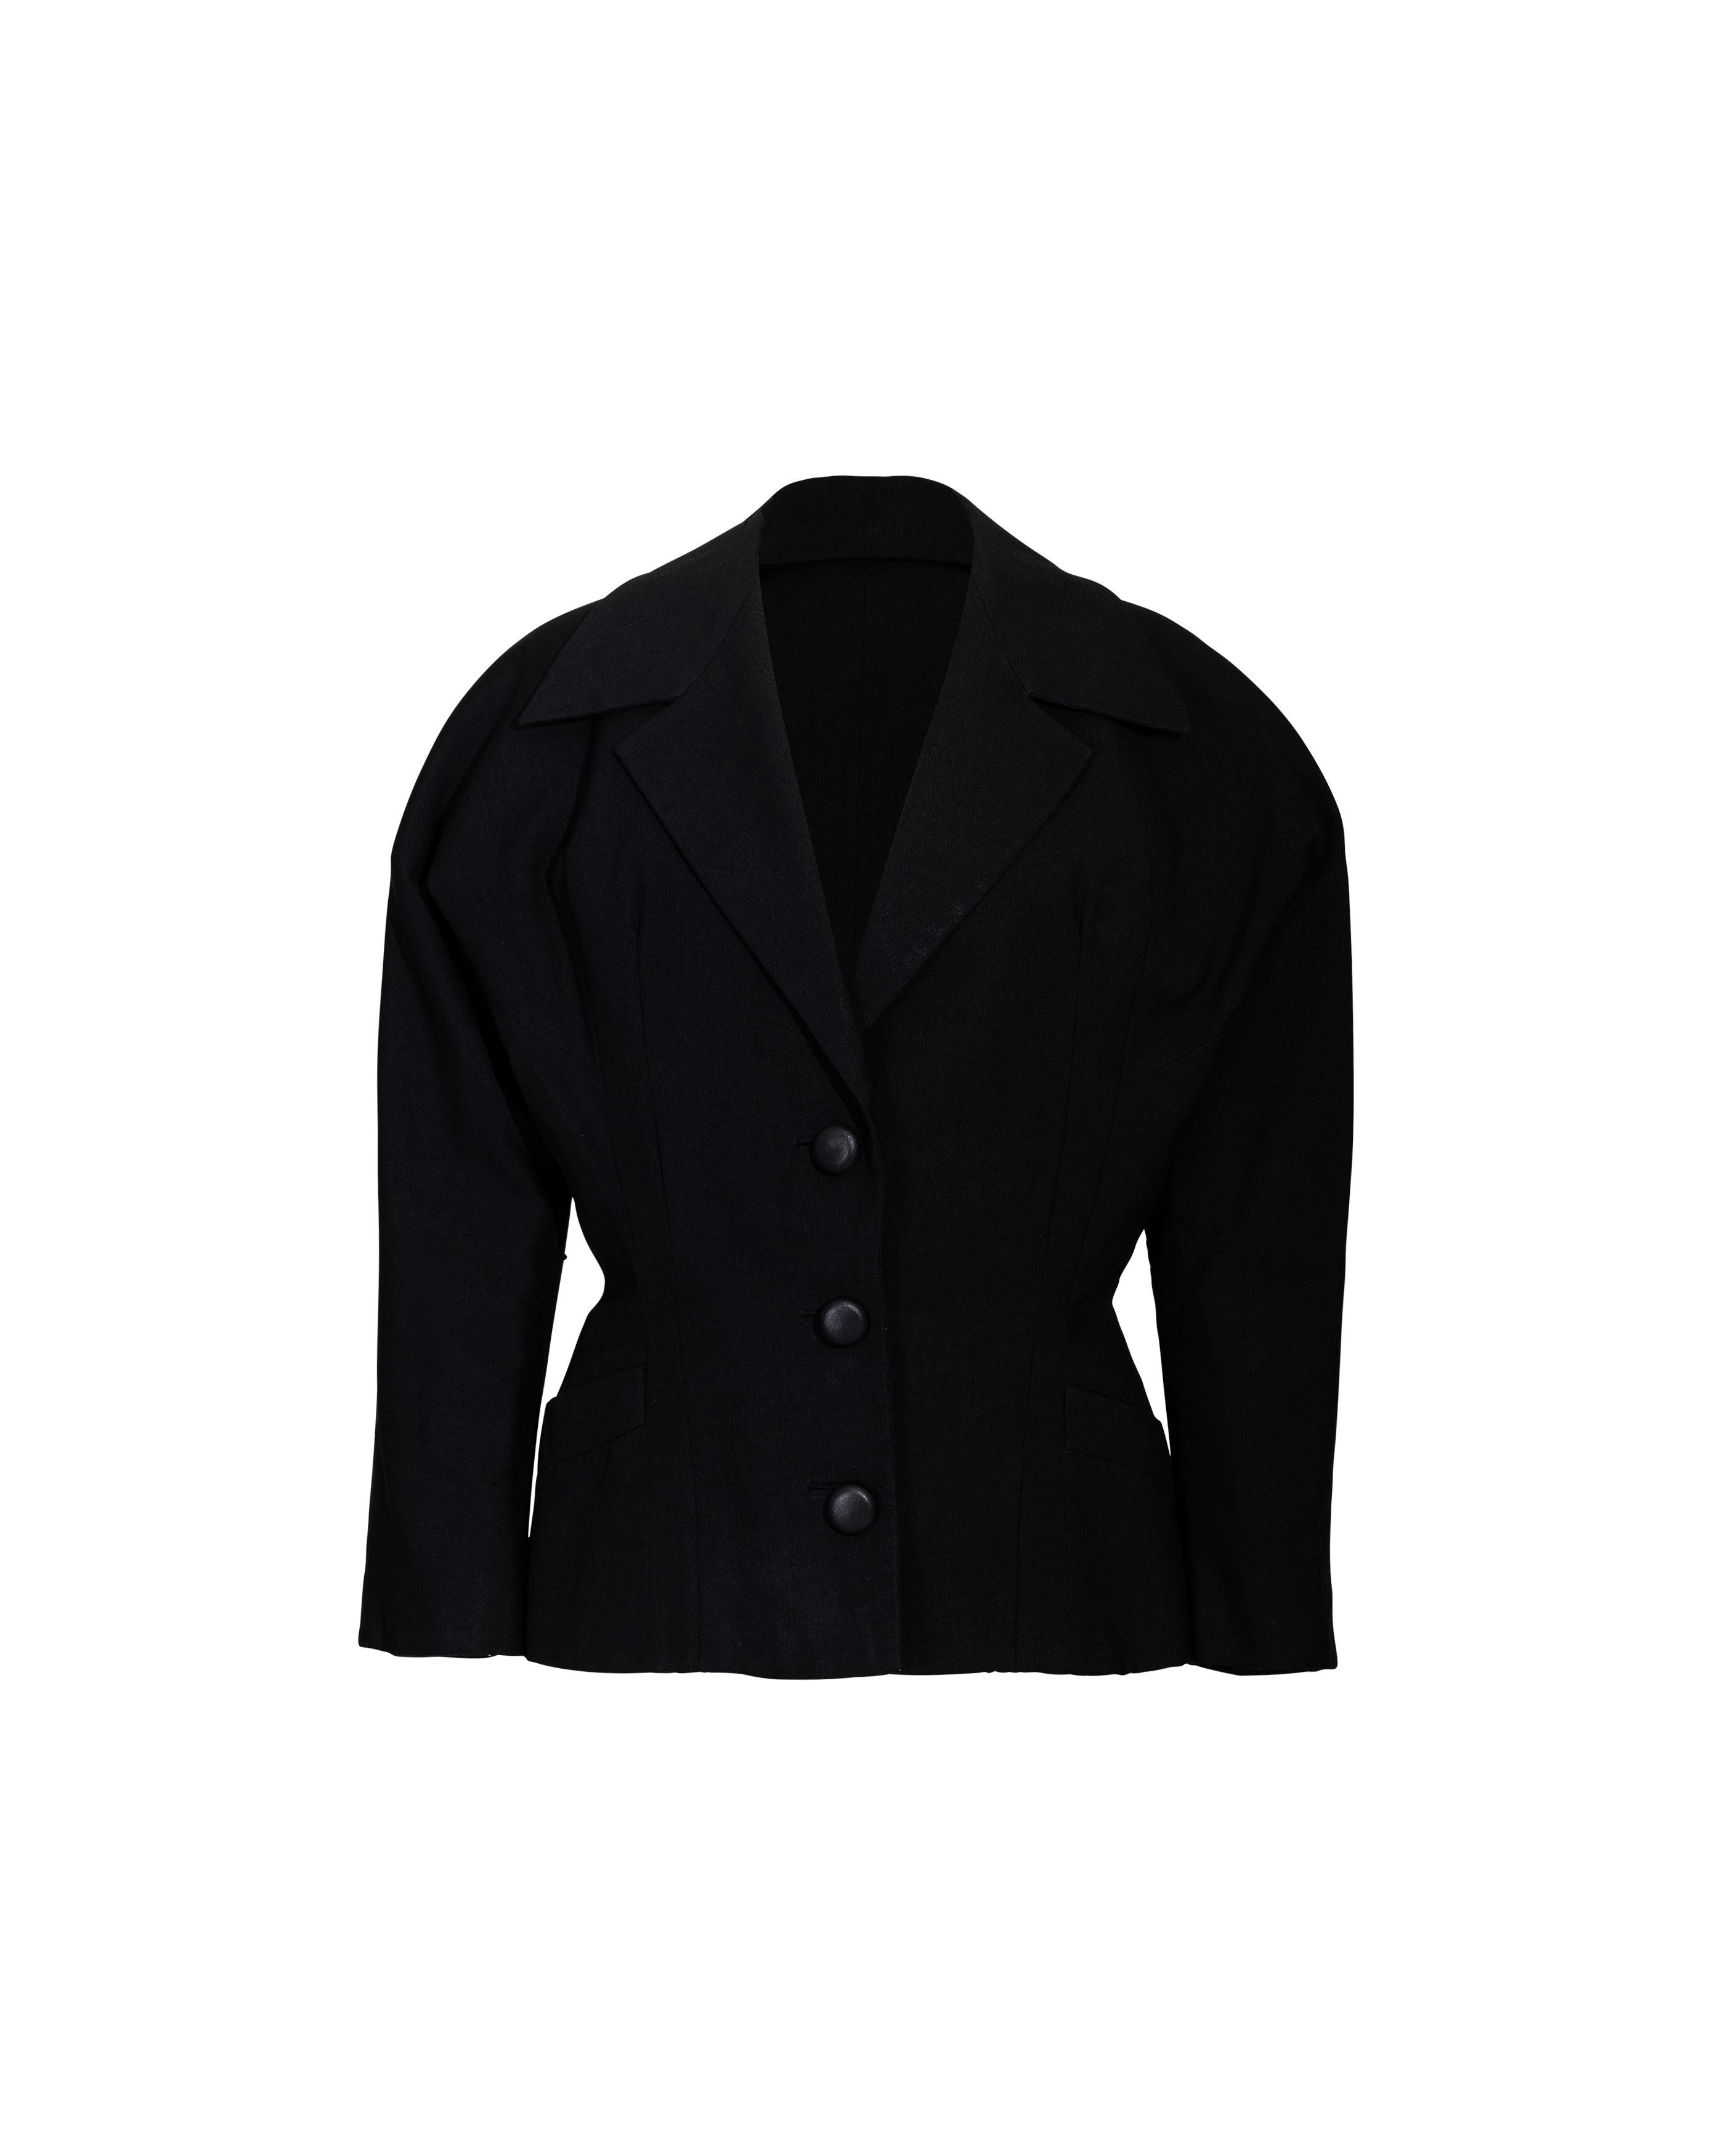 c. 1950 Christian Dior 'New Look' Black Wool Jacket For Sale 4